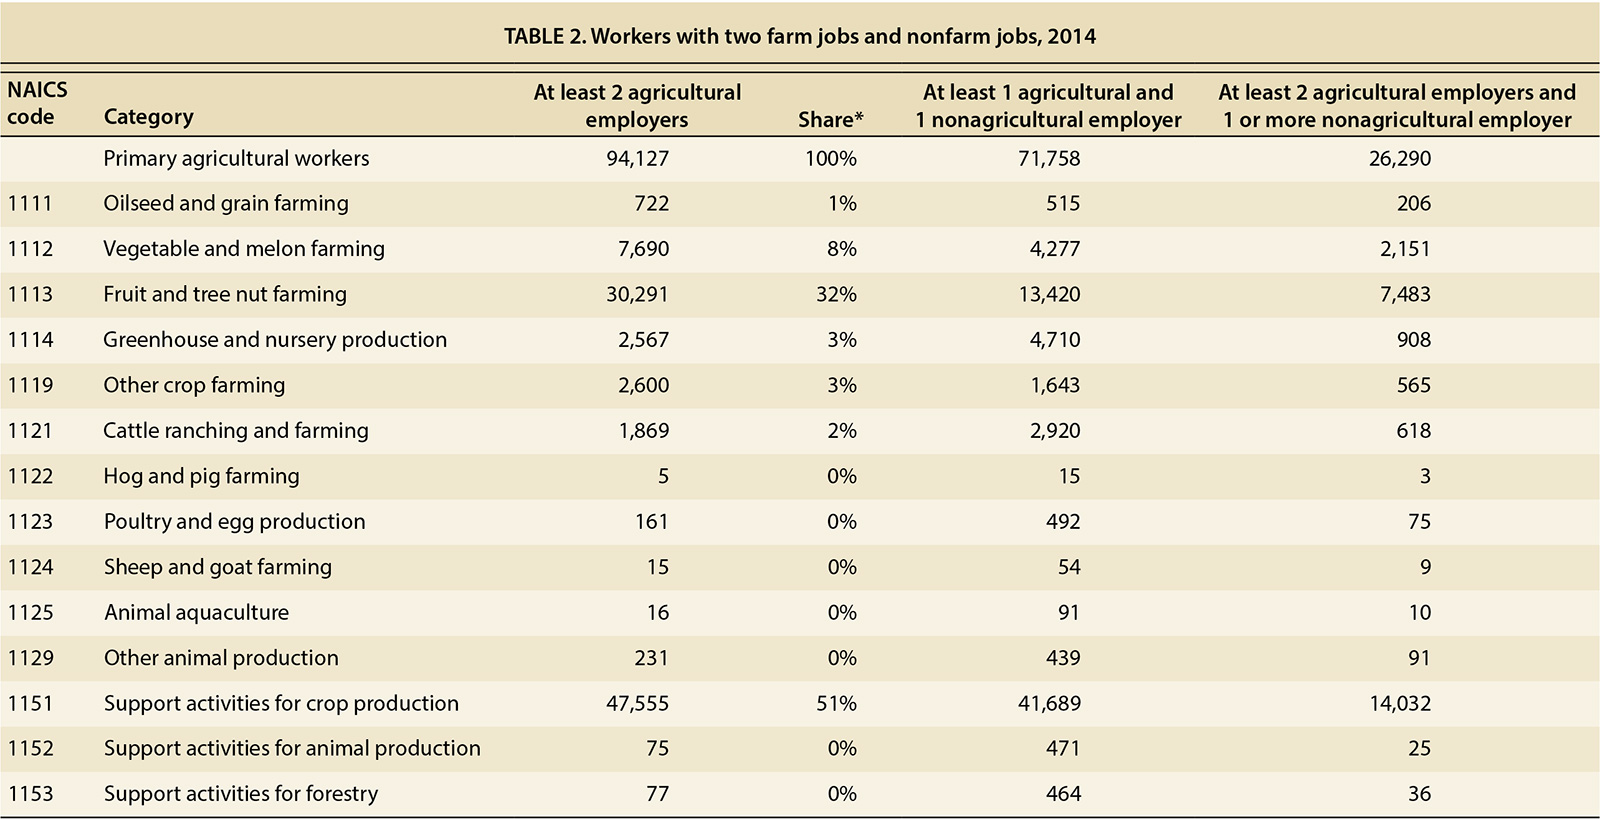 Workers with two farm jobs and nonfarm jobs, 2014